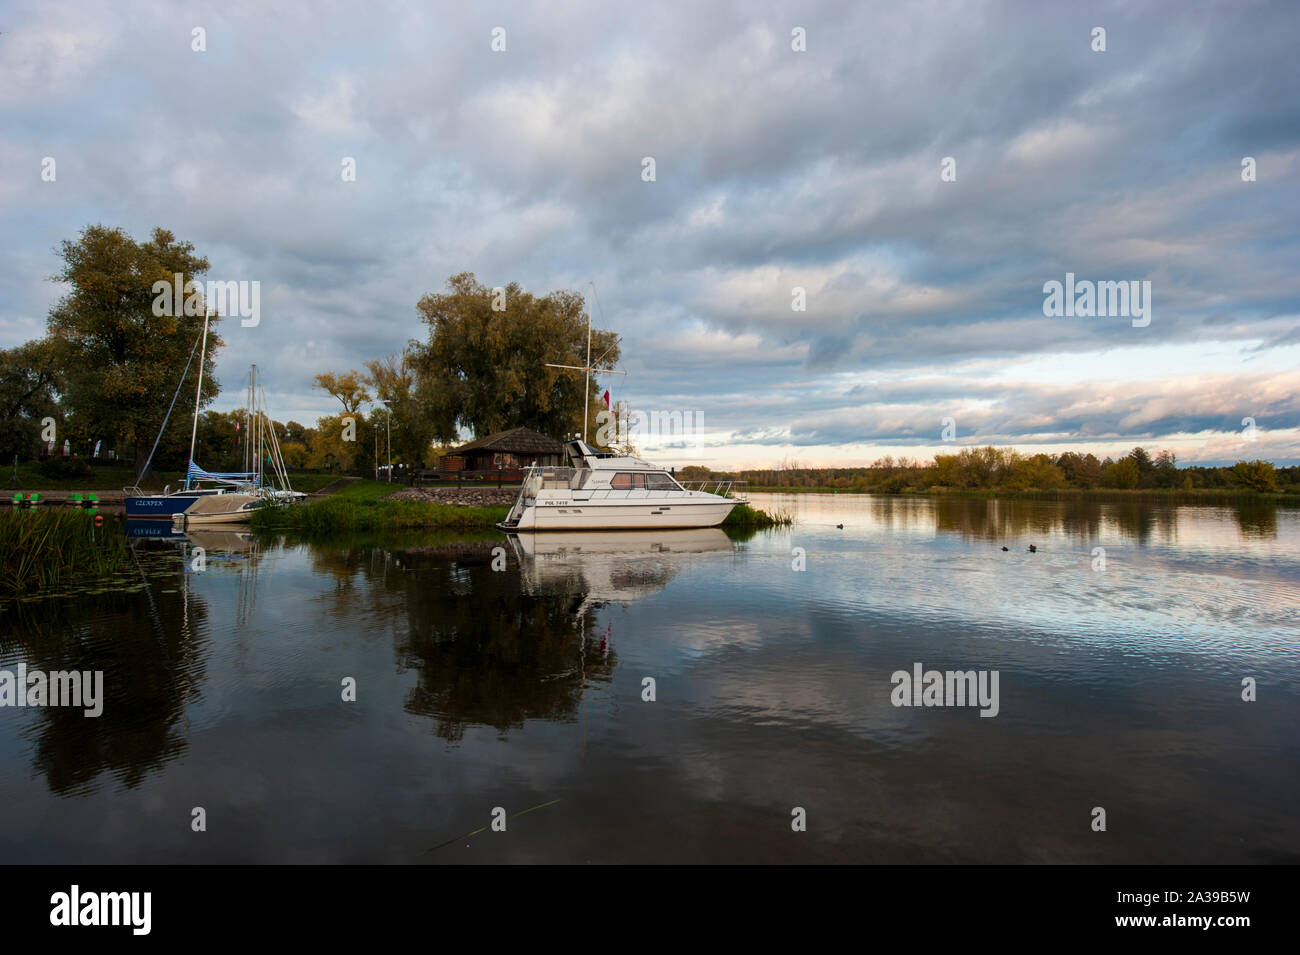 Early autumn landcape on the Narew river in central Poland, Stock Photo